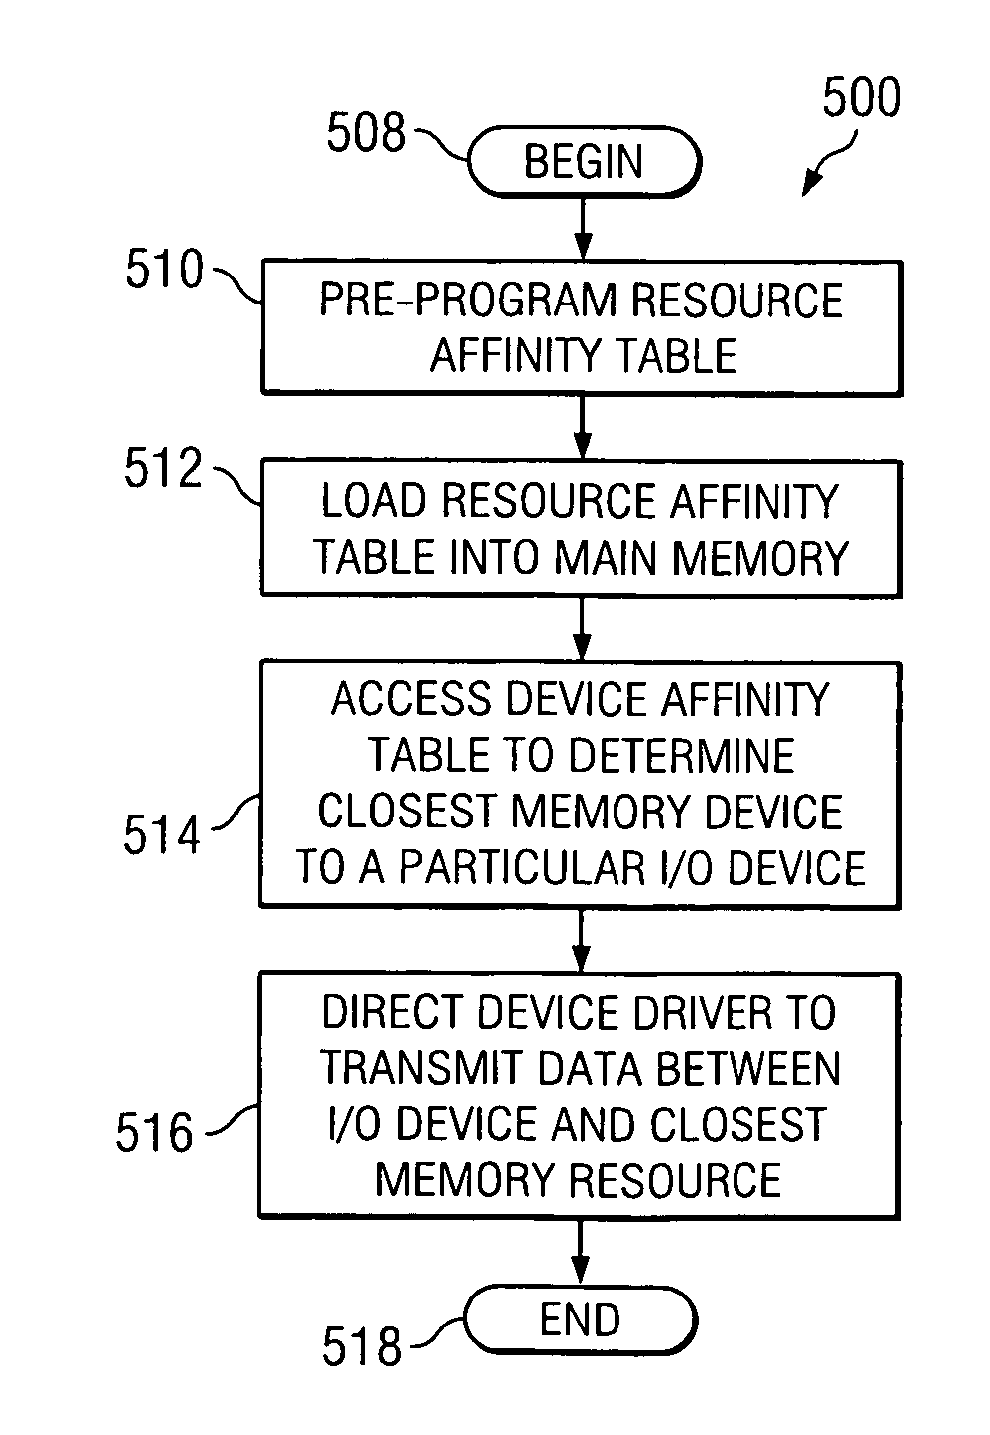 Optimized memory allocator for a multiprocessor computer system